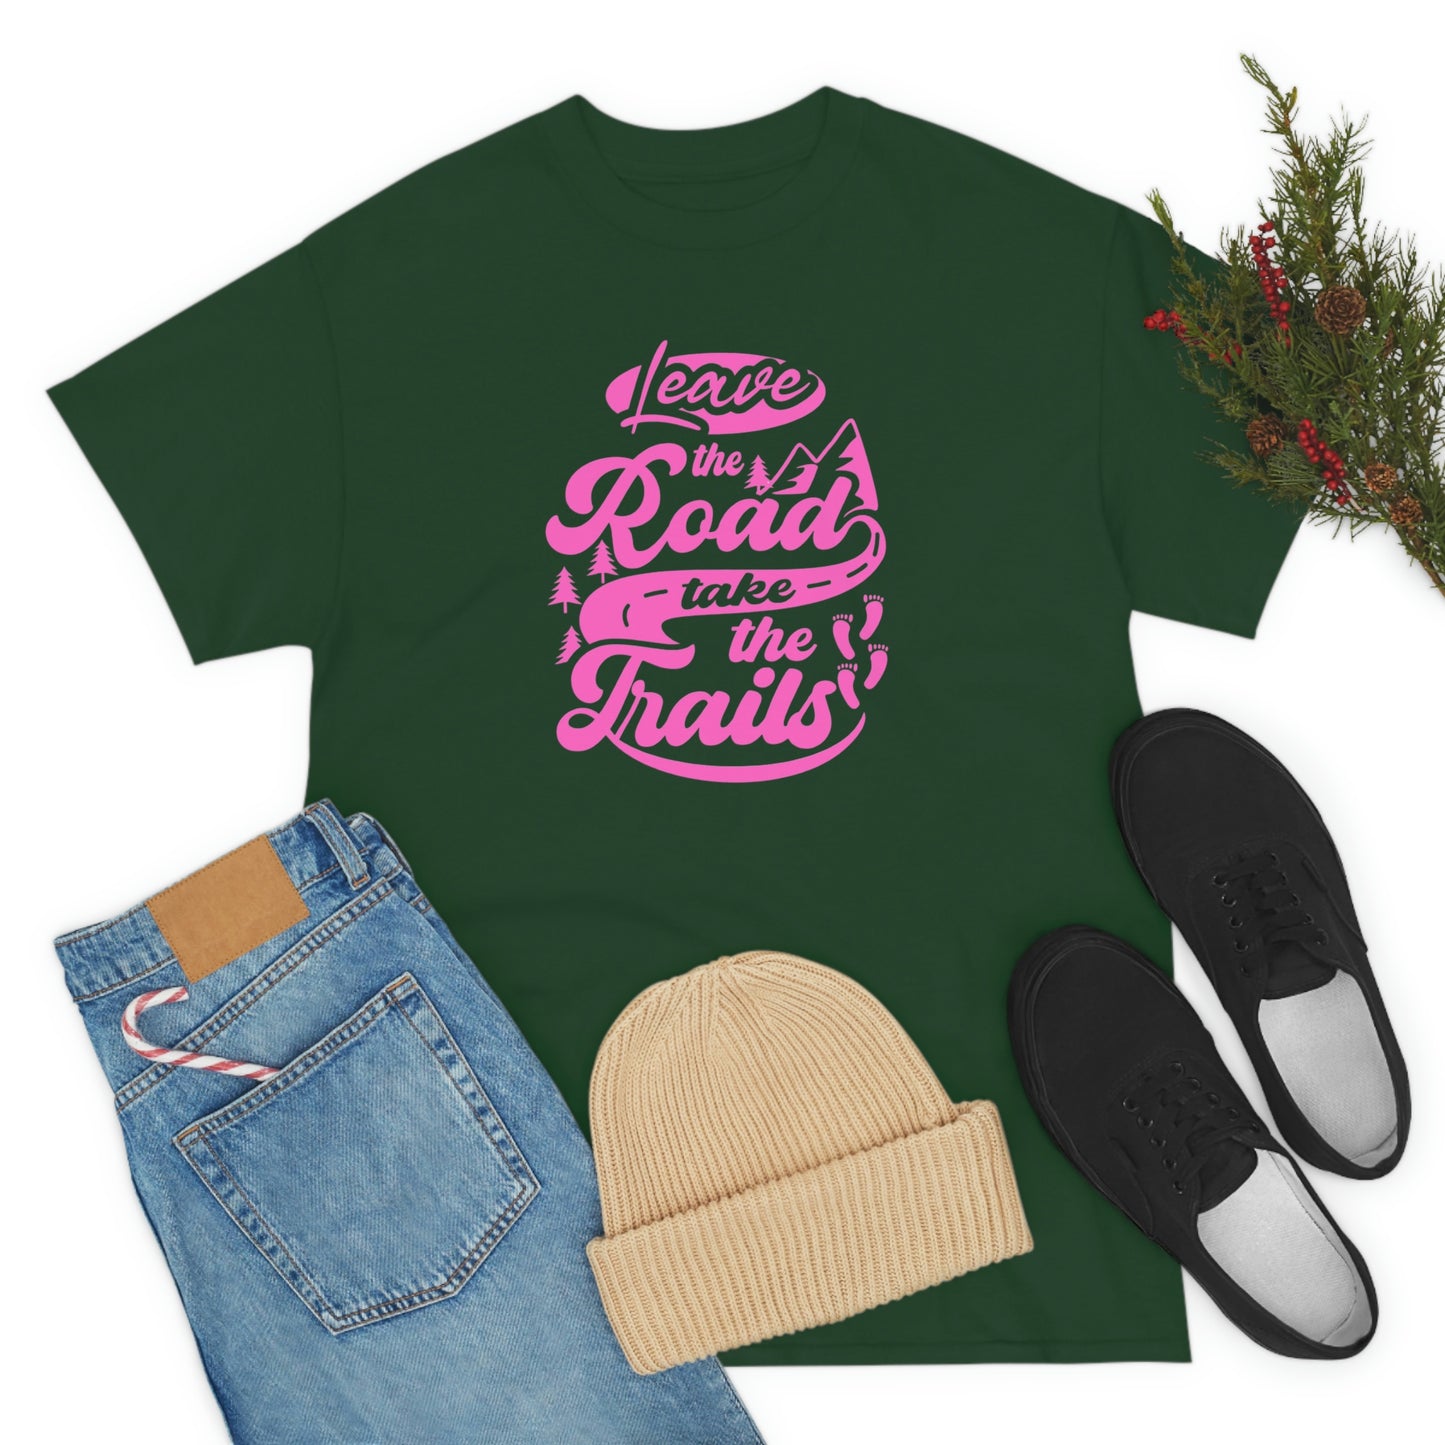 ‘Leave the road, take the trails’  Unisex Heavy Cotton Tee